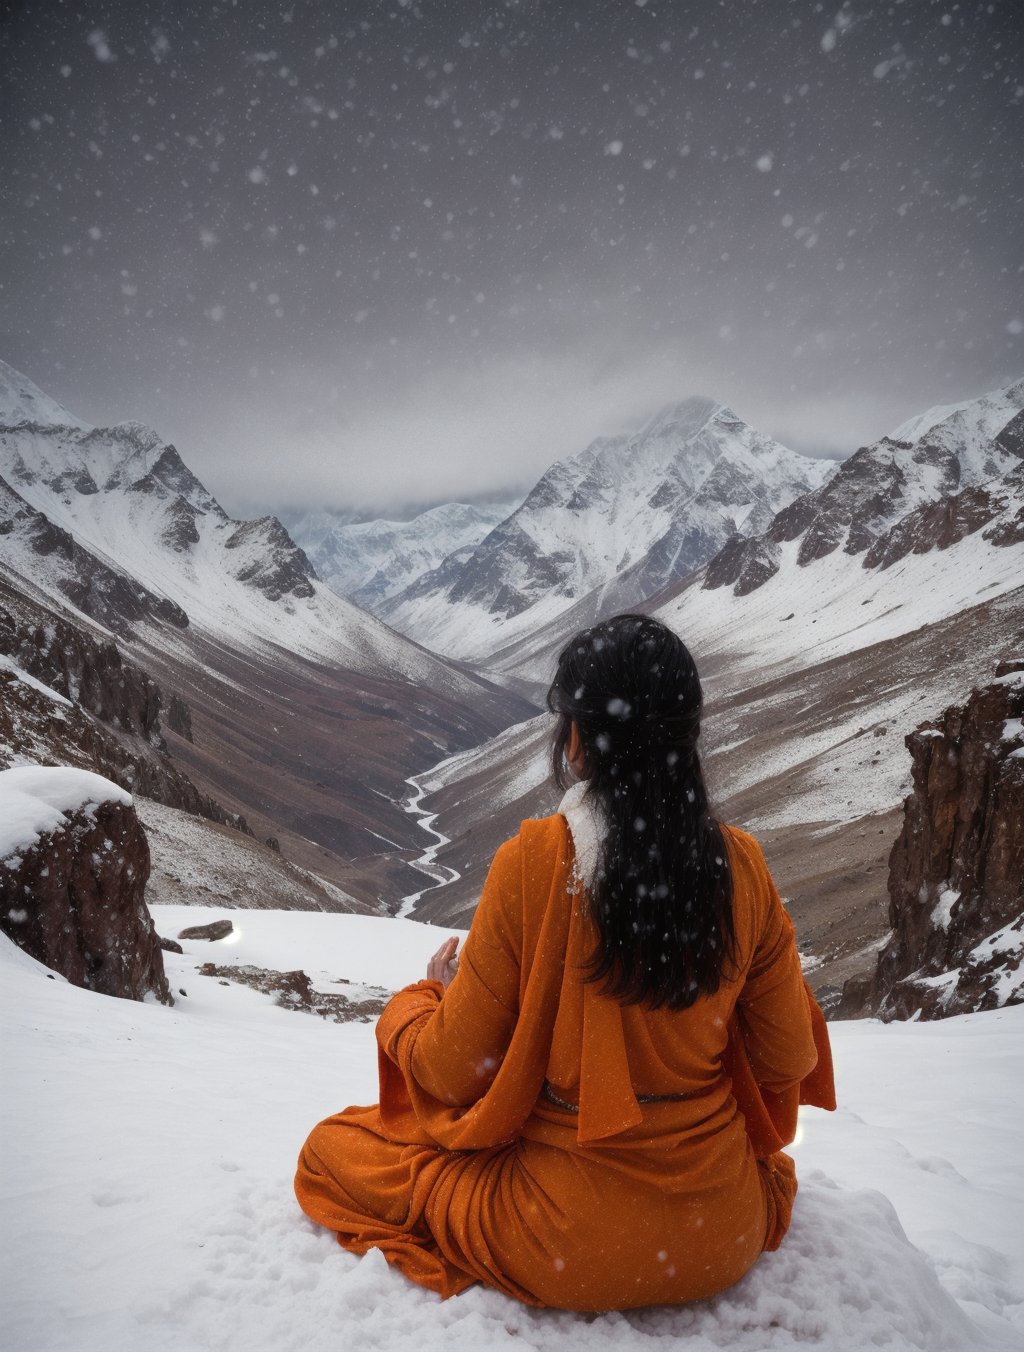 ((backview)), a young, hindu priestess, female, ((meditating:1.2)) in the rocky (mountaintop) of the himalayas in a snowy blizzard, covered in snow, snowfall. draped in a orange cloth.